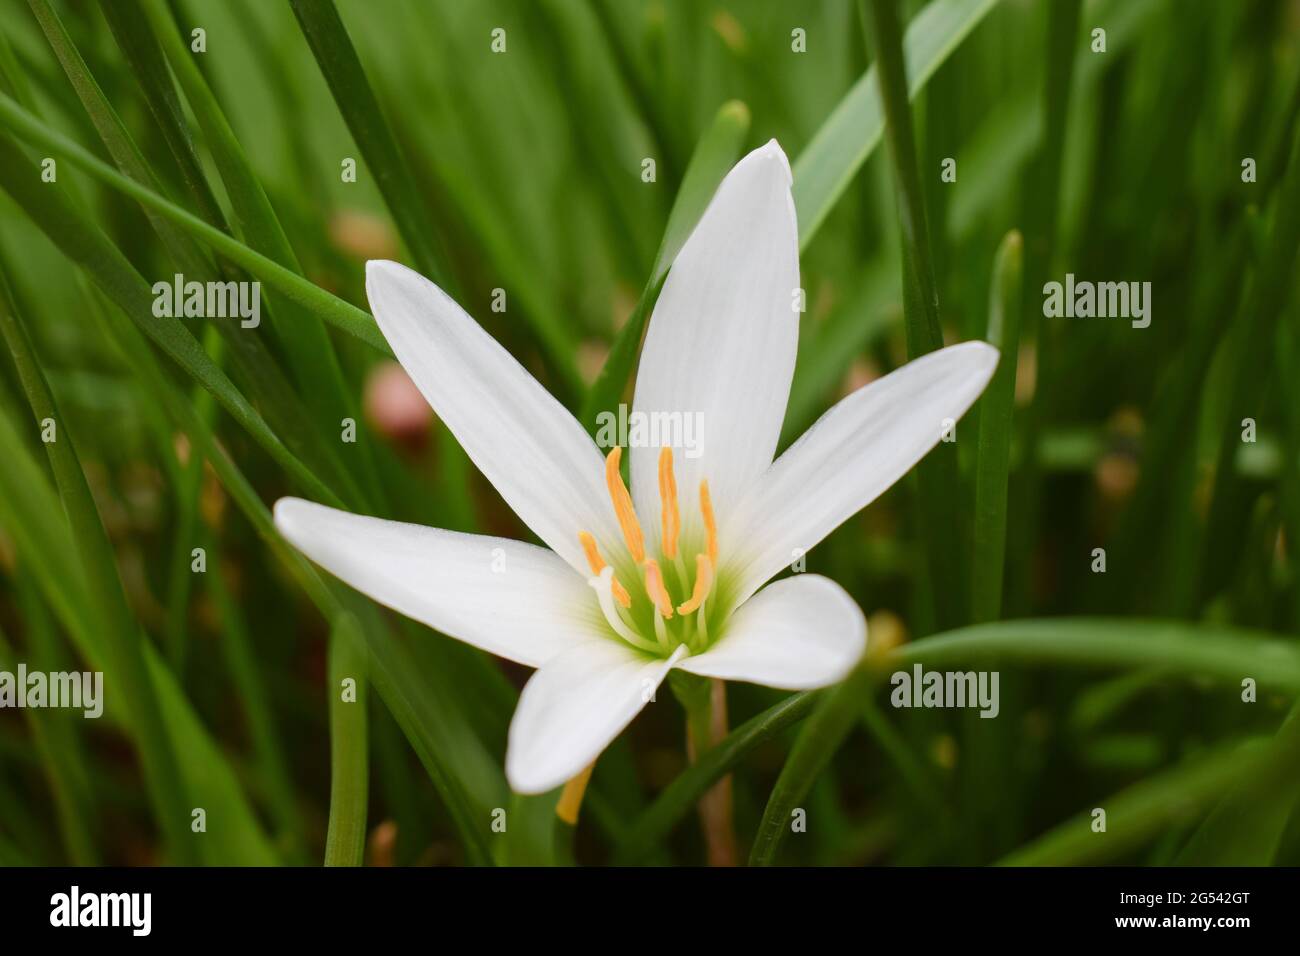 Rain lily flower in white color also known as Zephyranthes carinata. Indian flowering plants Stock Photo